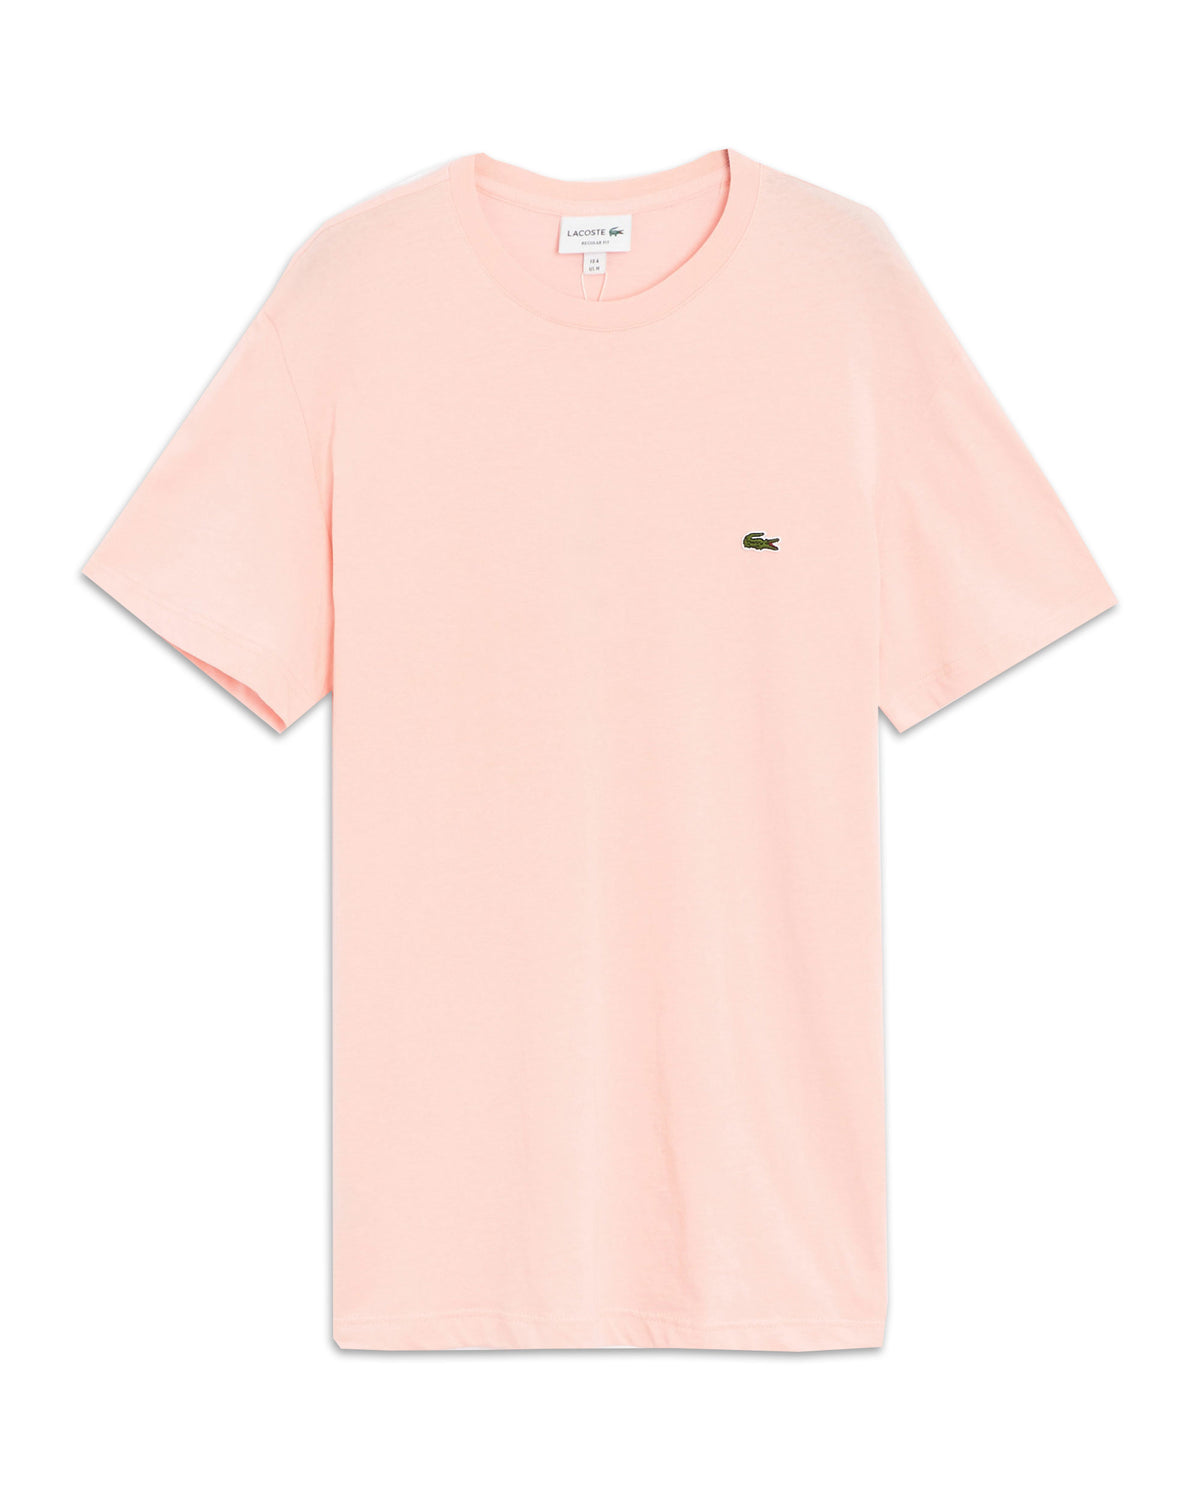 Man Tee Lacoste Pink